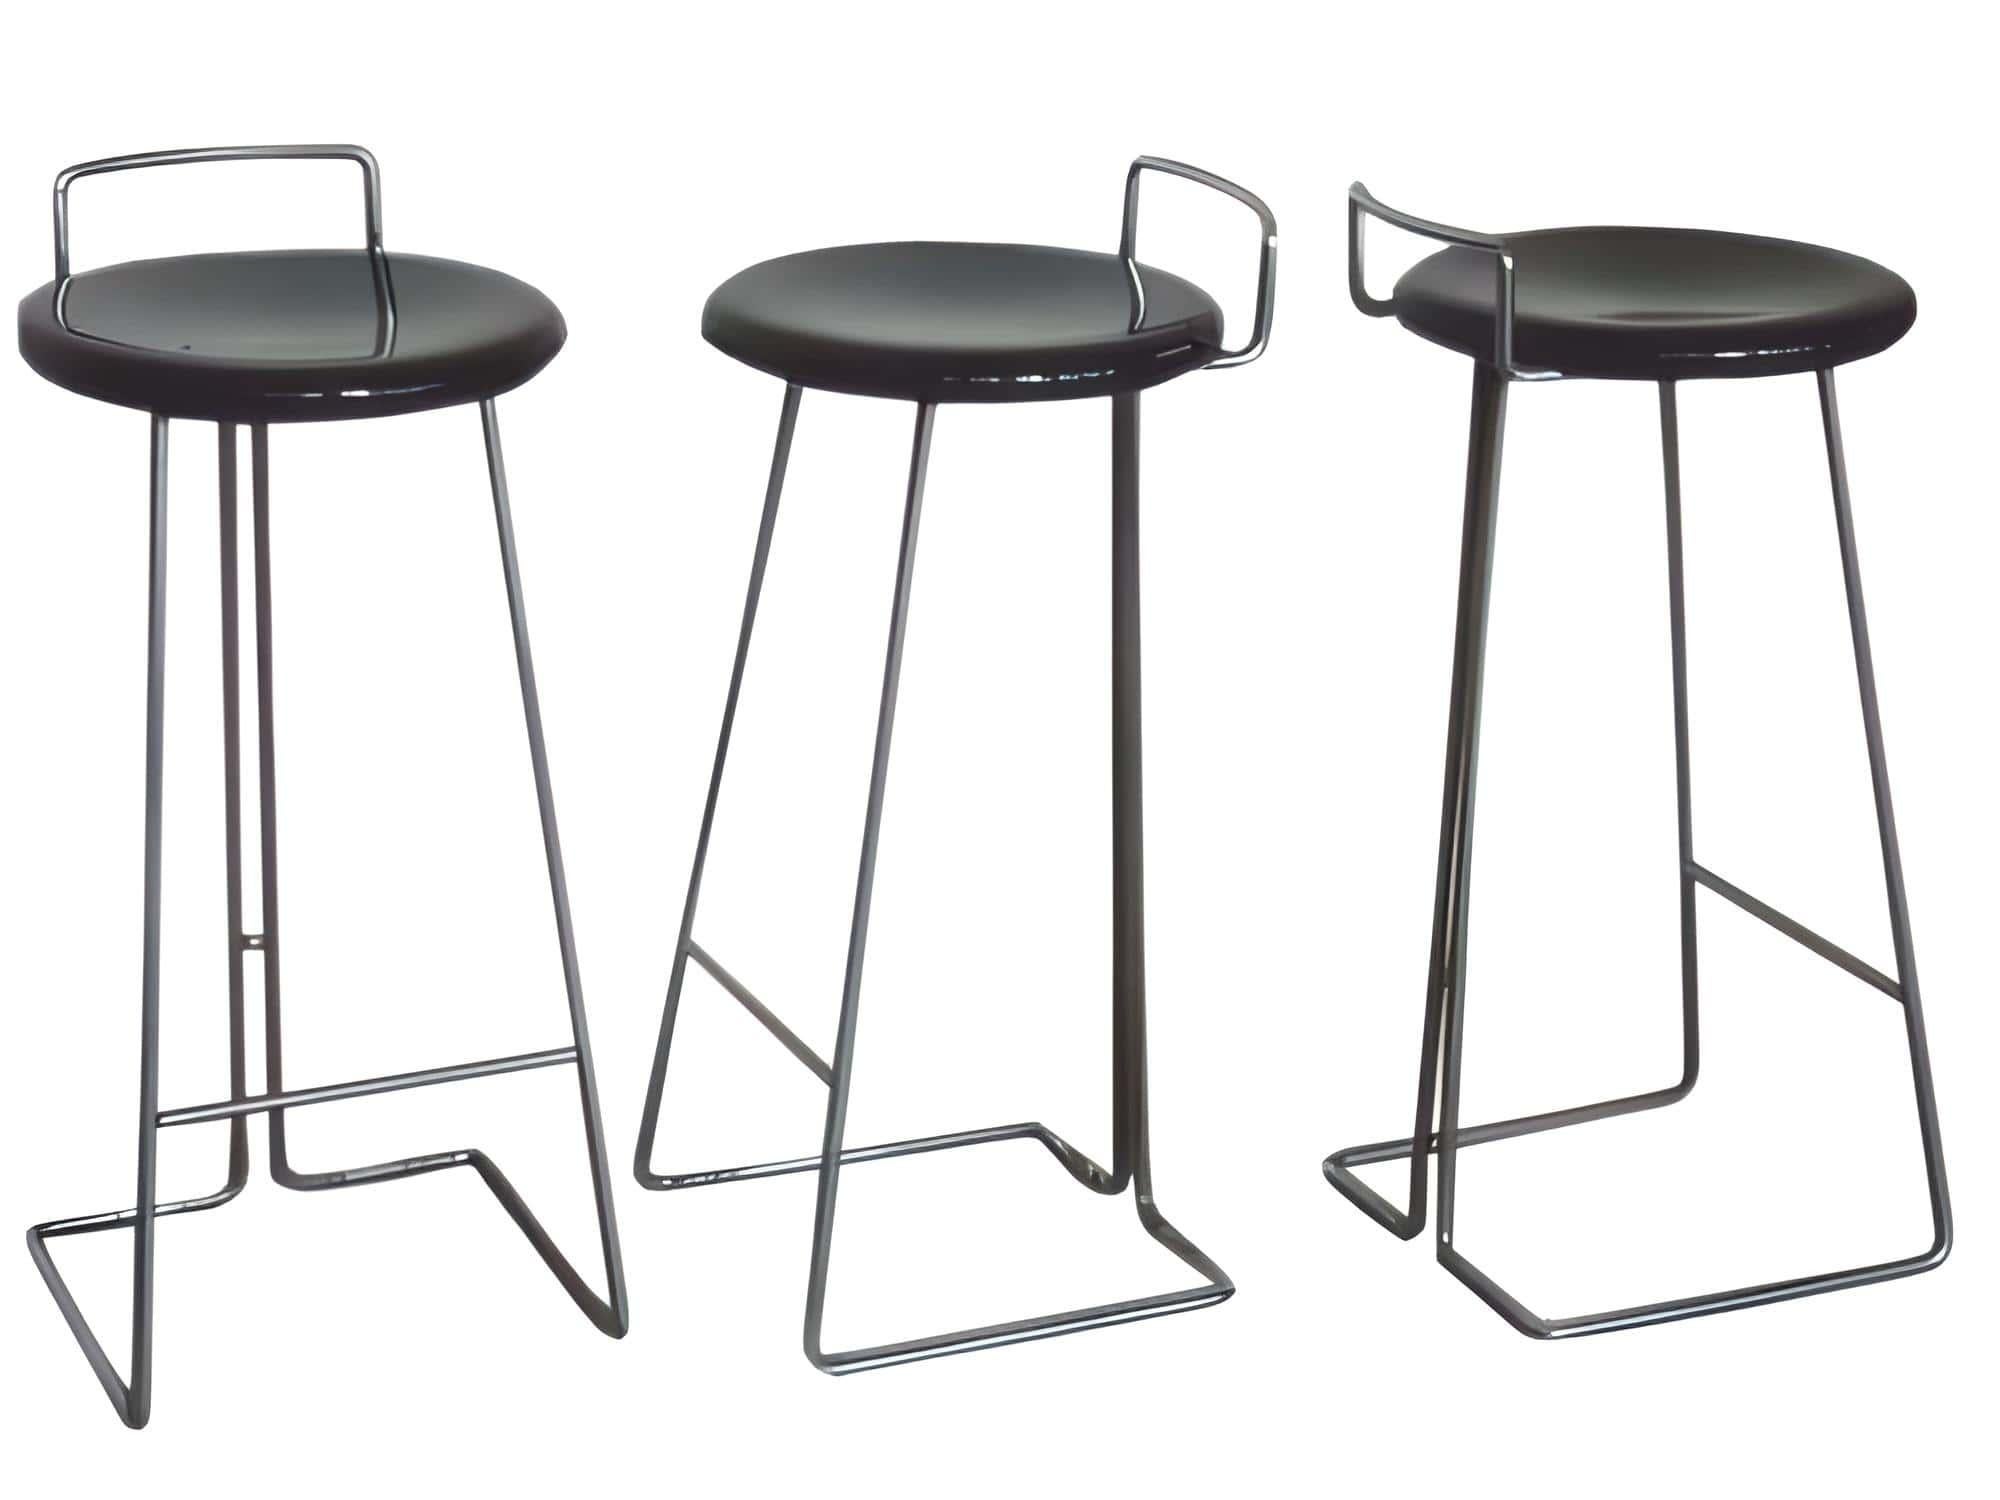 Dada prod, Italy three stools by Coslin George design in years °70

in good vintage condition.